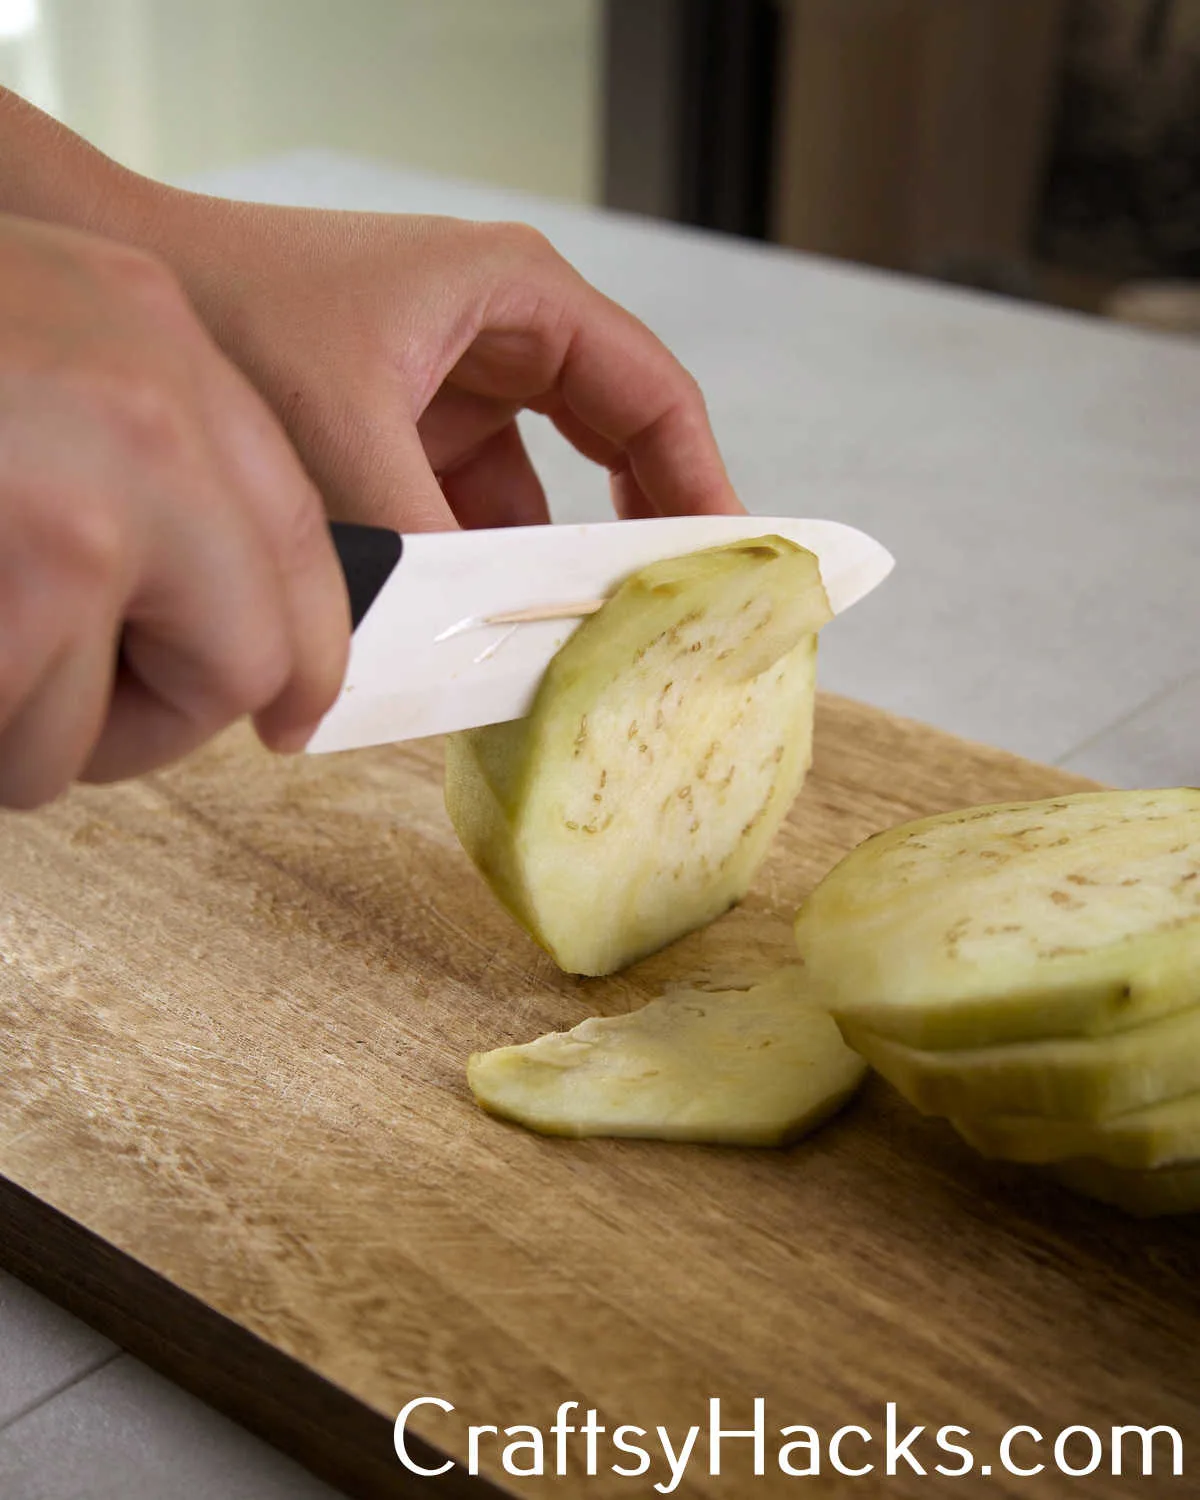 use toothpick to prevent vegetables from sticking to the knife